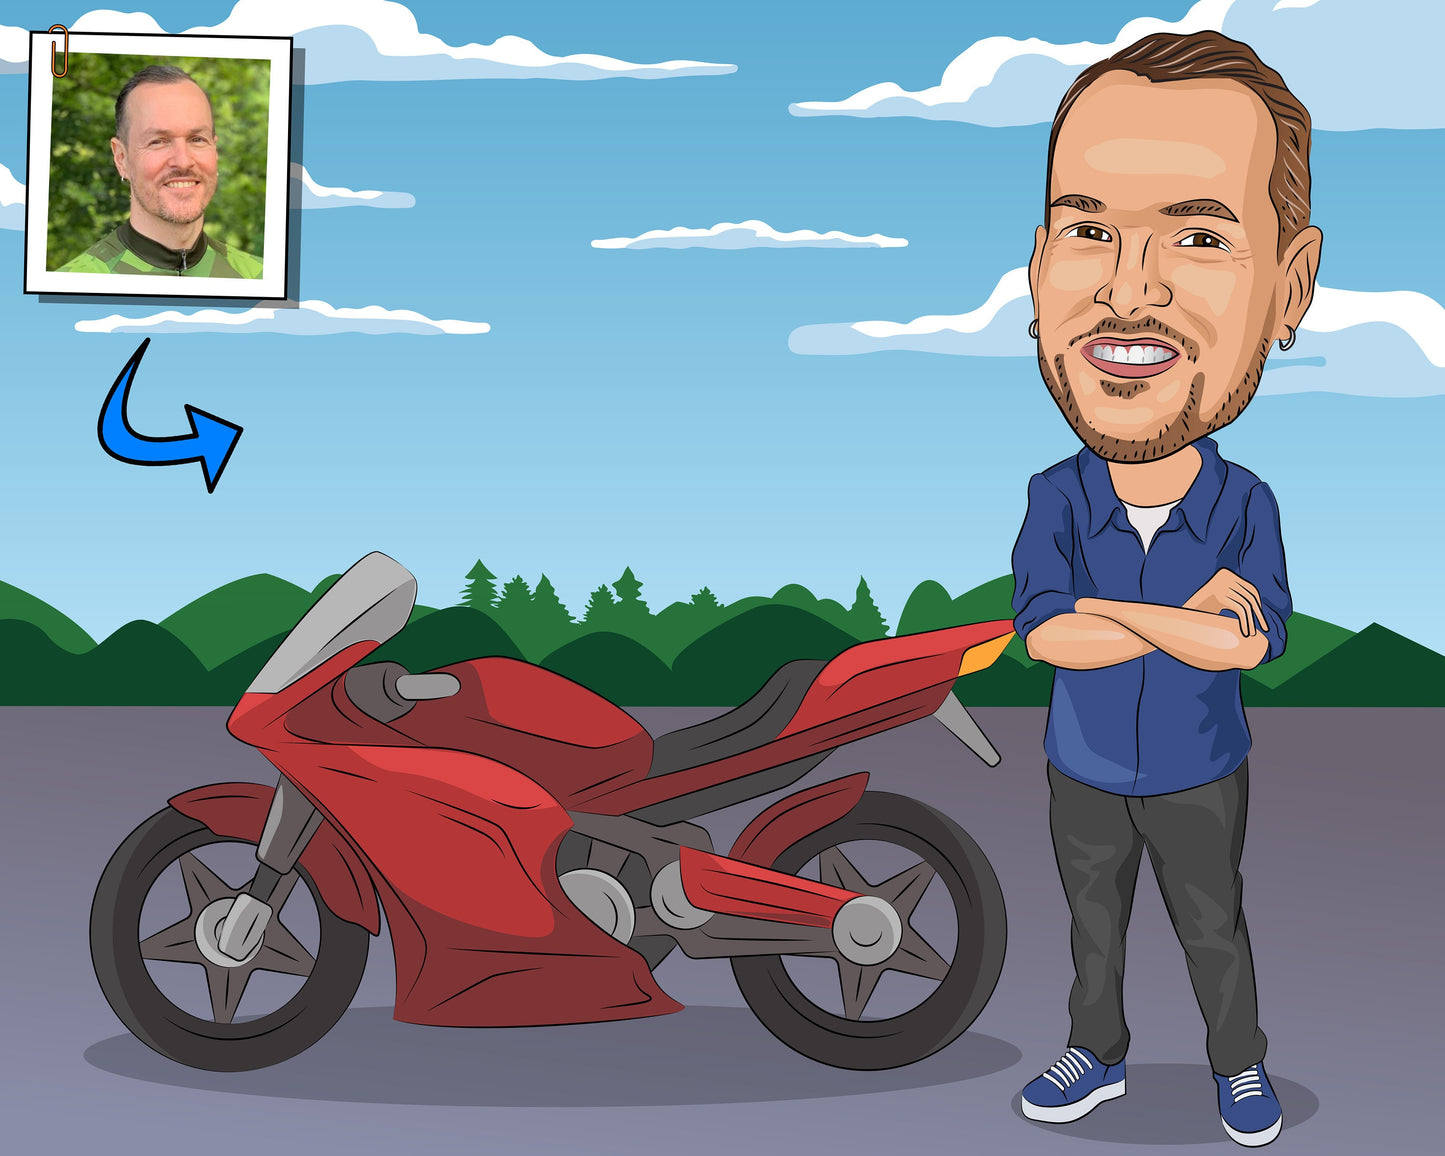 Motorcyclist Gift - Custom Caricature Portrait From Your Photo